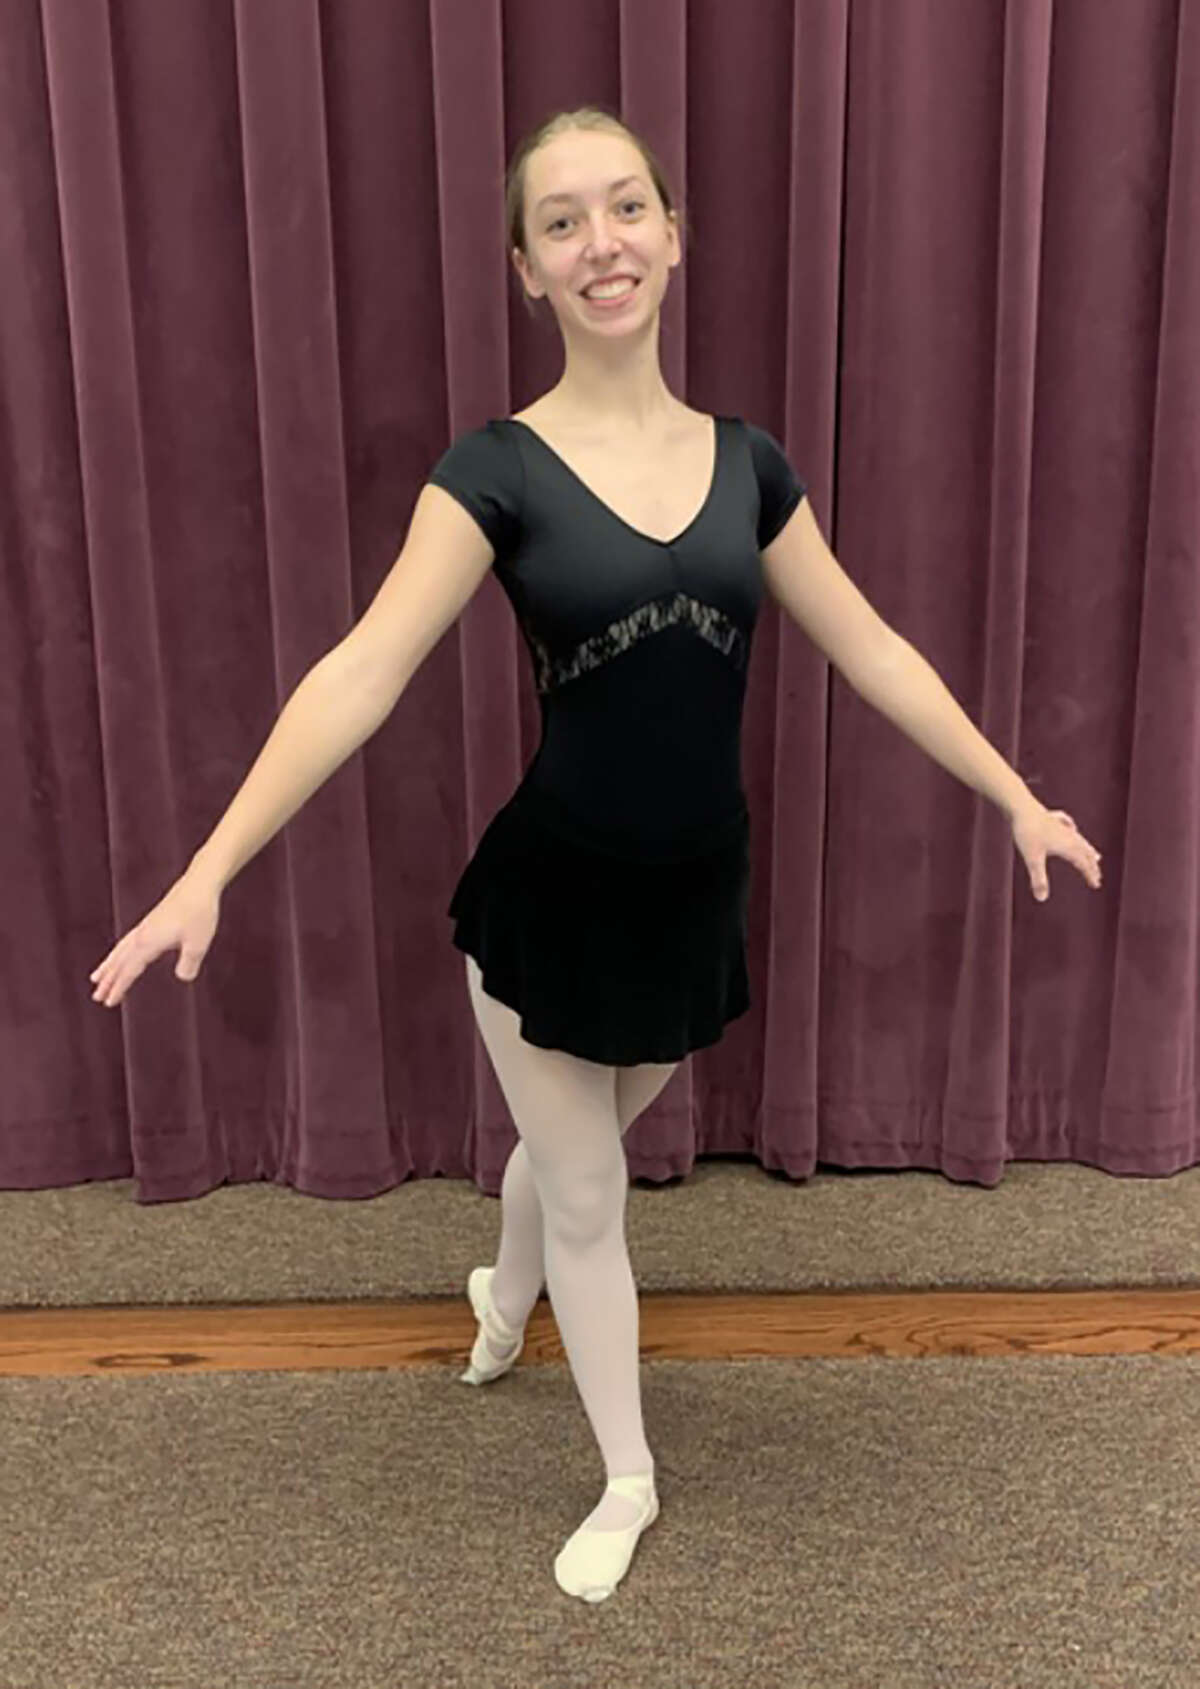 Nora Wilson of Jacksonville will dance the roles of the Fairy of Beauty and Cinderella during Saturday's performances of "Sleeping Beauty" at The Legacy Theatre in Springfield.